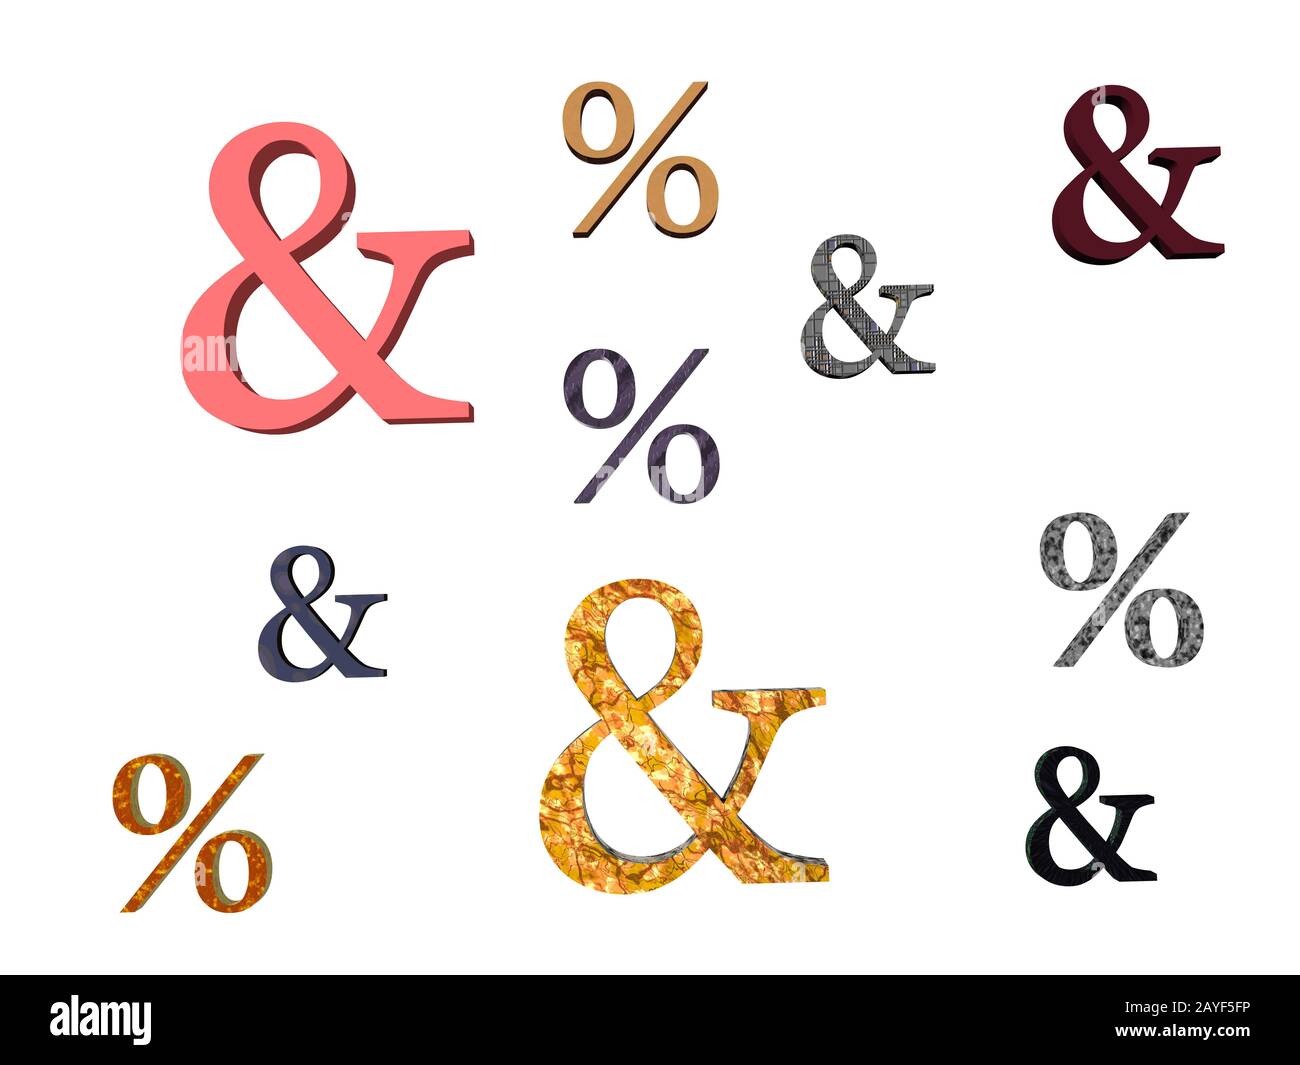 colorful percent signs and commercial signs Stock Photo